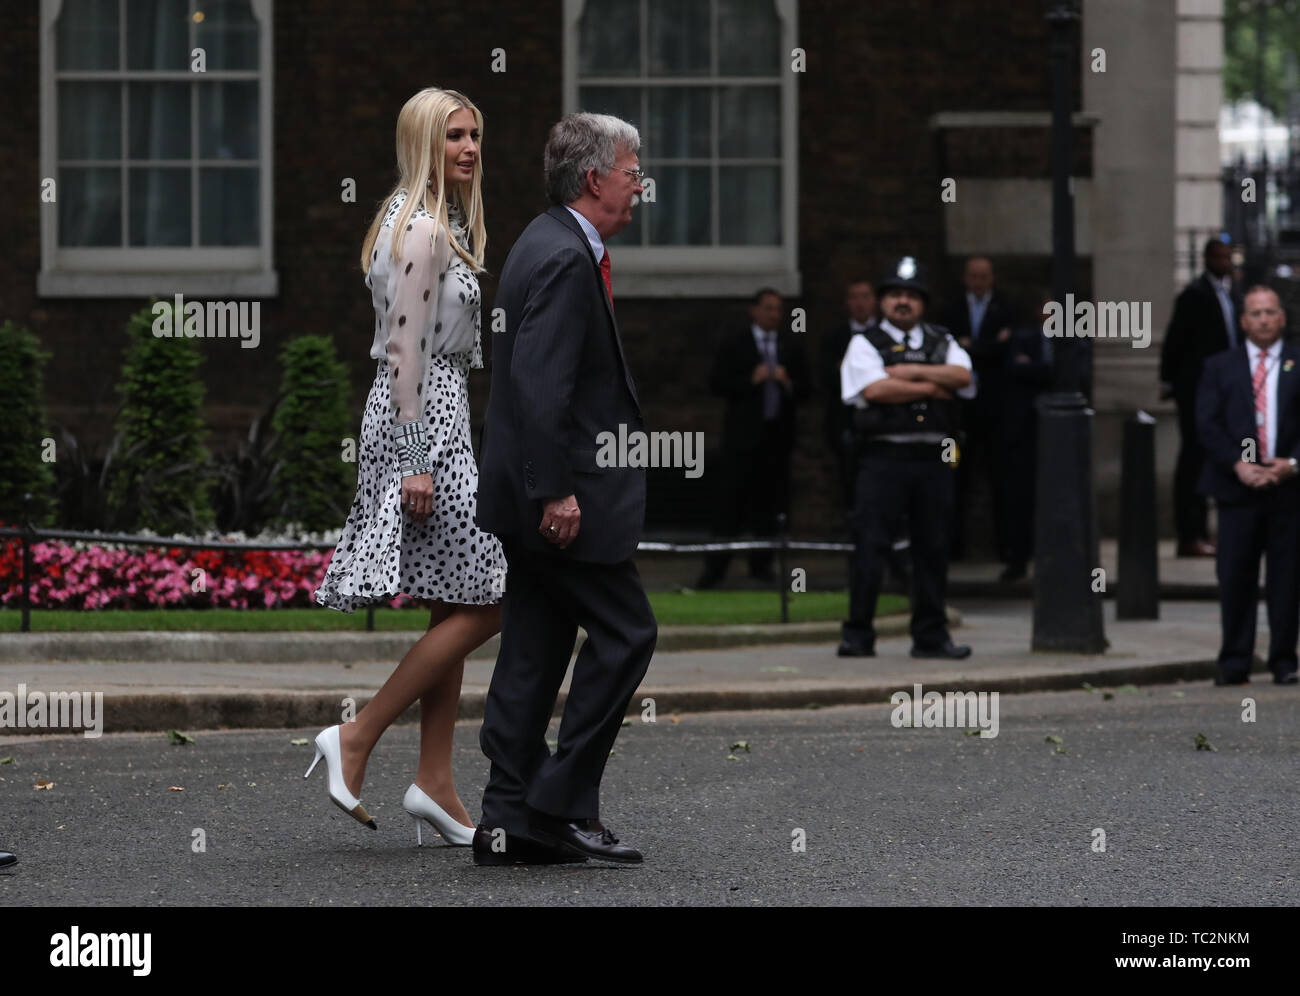 London, UK. 04th June, 2019. Ivanka Trump (White House advisor and first daughter of the United States), walks behind John Bolton (National Security Advisor), after leaving Number 10 Downing Street. The President met The Prime Minister during his state visit to the UK. Donald Trump, State visit, Downing Street, London, UK on June 4, 2019. Credit: Paul Marriott/Alamy Live News Stock Photo